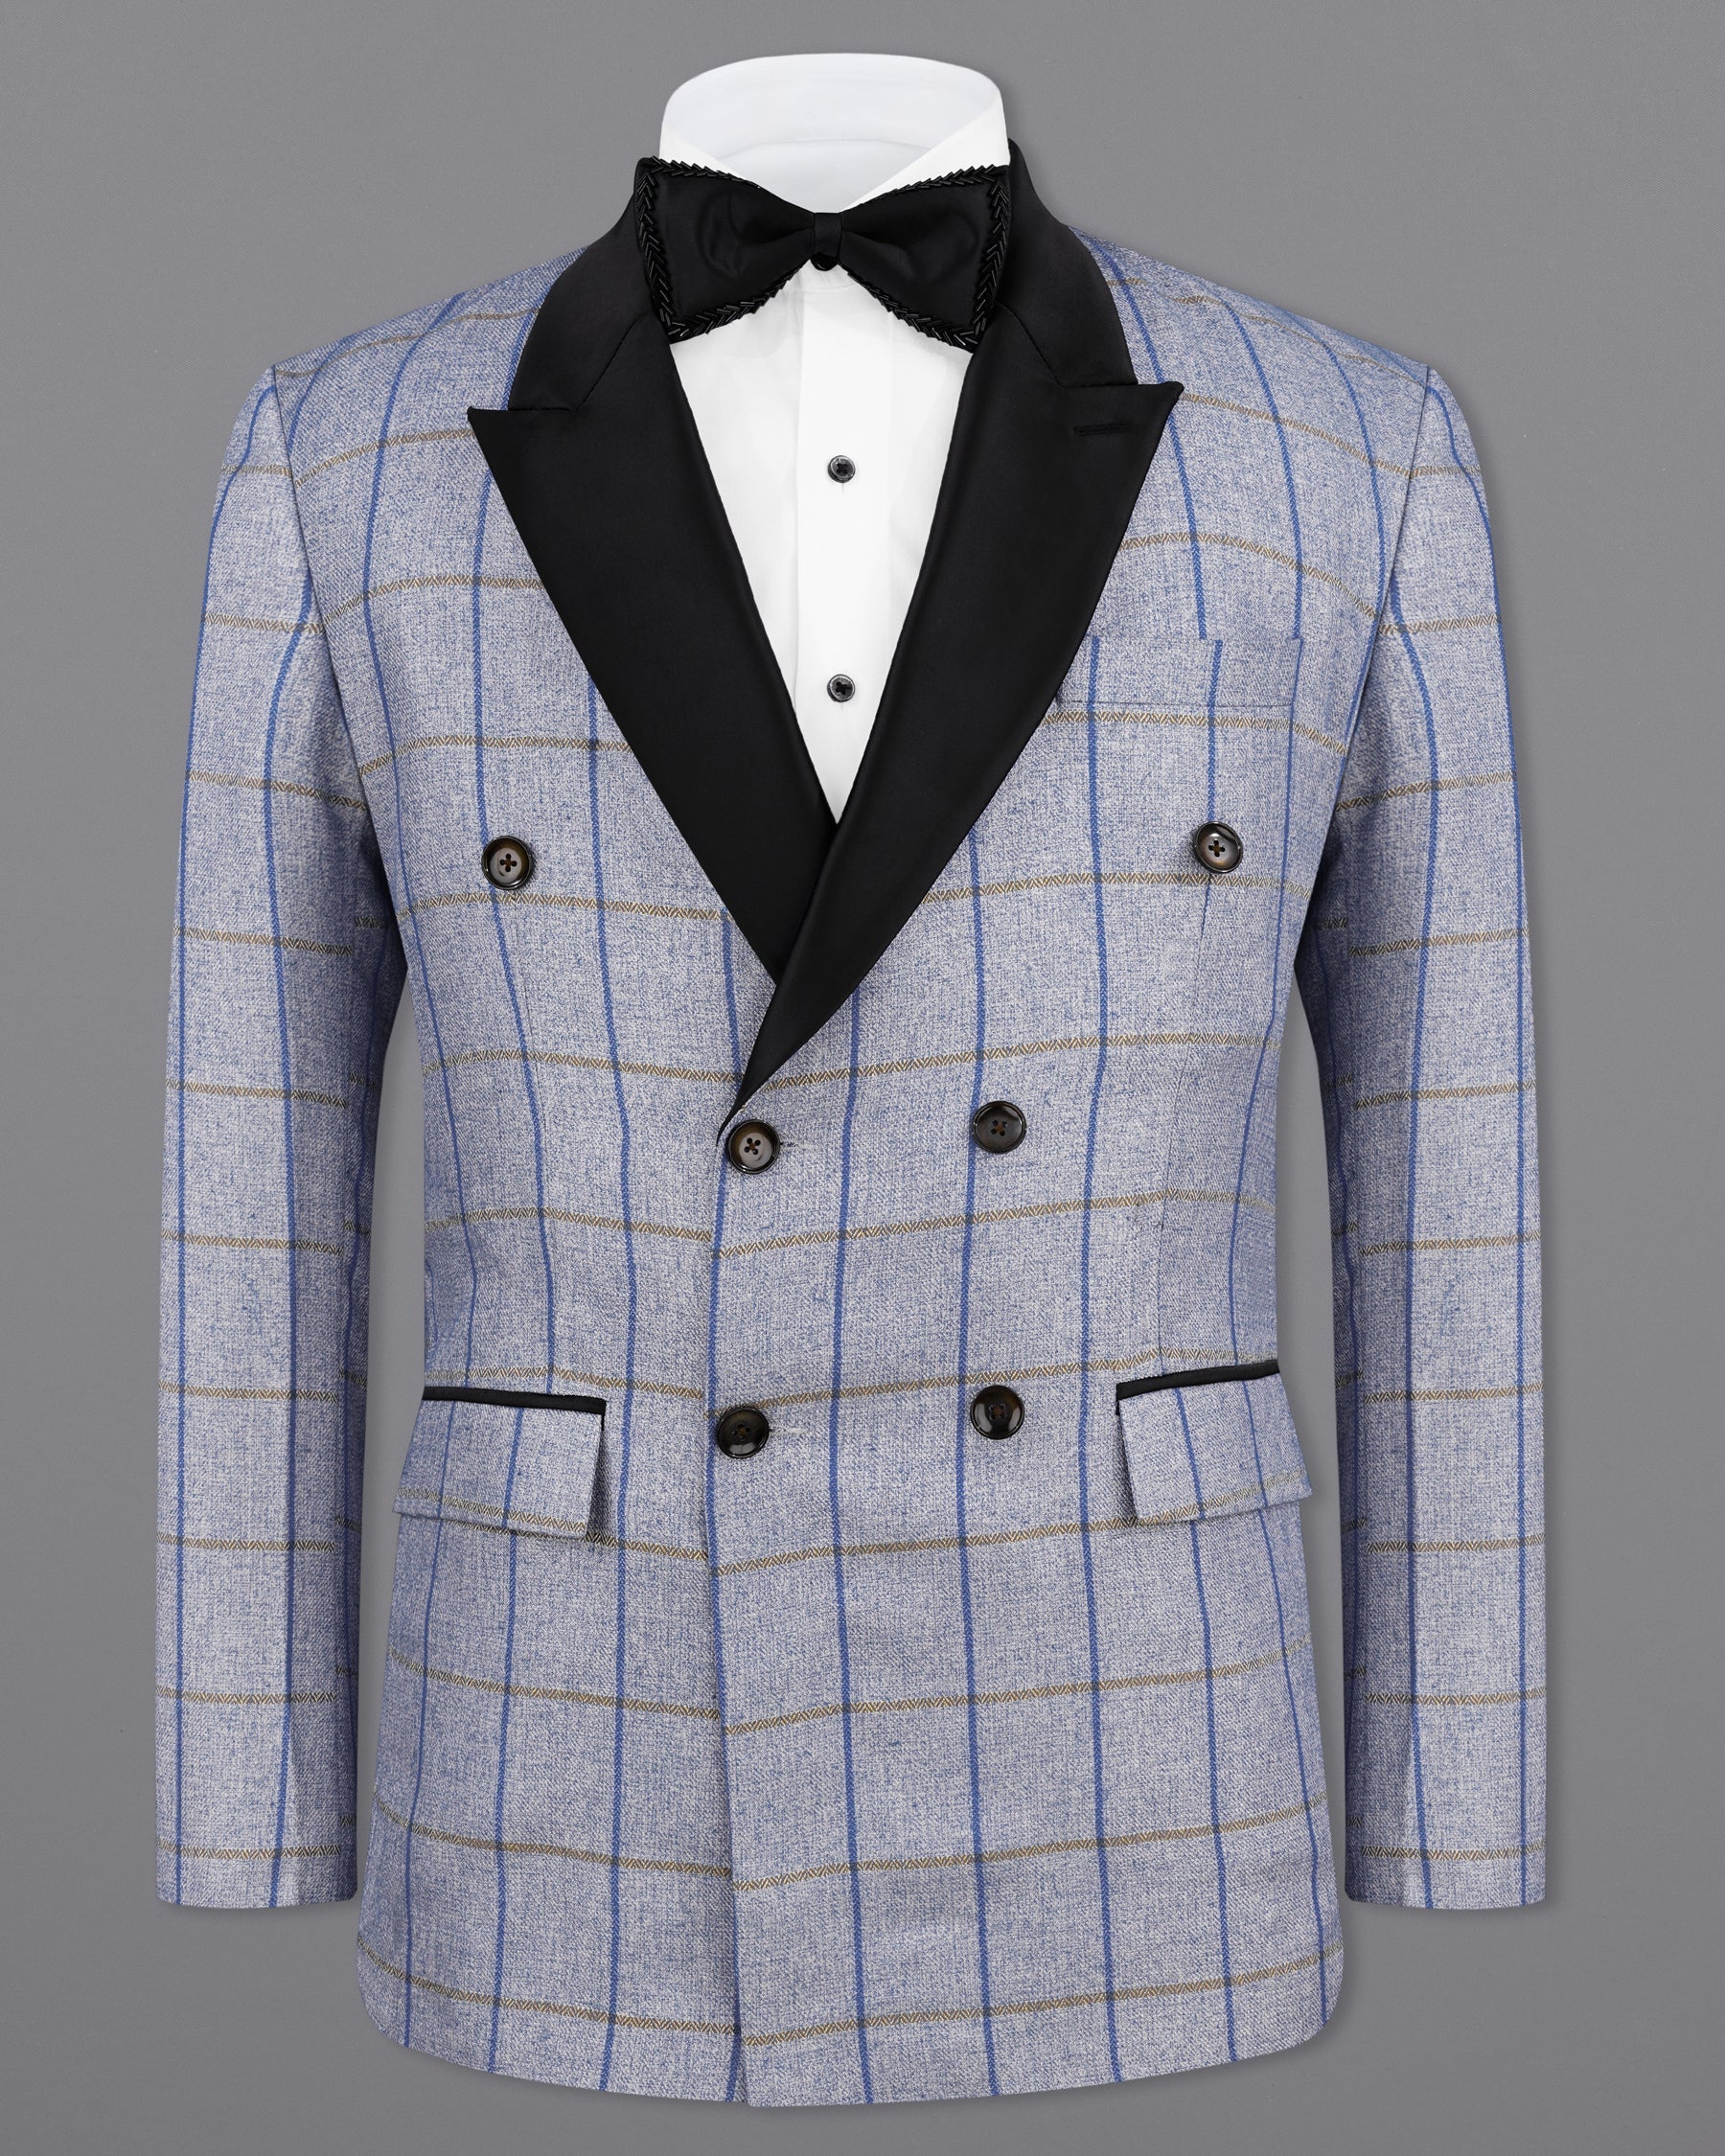 Mobster Blue Checkered Double Breasted Black Lapel Designer Blazer BL2150-DB-BKL-36 , BL2150-DB-BKL-38, BL2150-DB-BKL-40, BL2150-DB-BKL-42, BL2150-DB-BKL-44, BL2150-DB-BKL-46, BL2150-DB-BKL-48, BL2150-DB-BKL-50, BL2150-DB-BKL-52, BL2150-DB-BKL-54, BL2150-DB-BKL-56, BL2150-DB-BKL-58, BL2150-DB-BKL-60